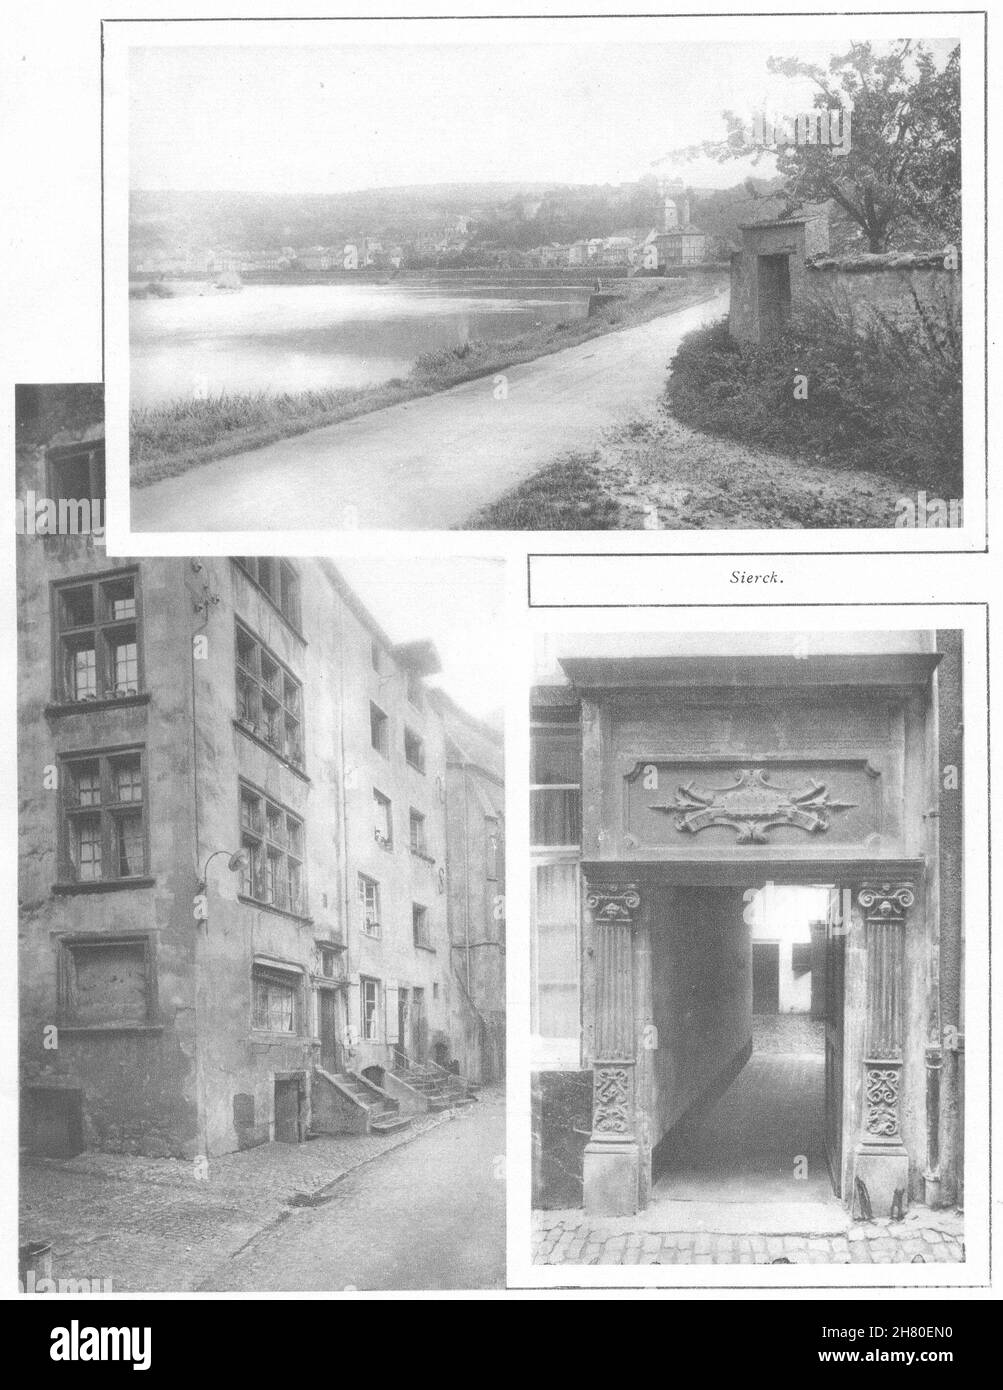 MOSELLE. Sierck 1937 old vintage print picture Stock Photo